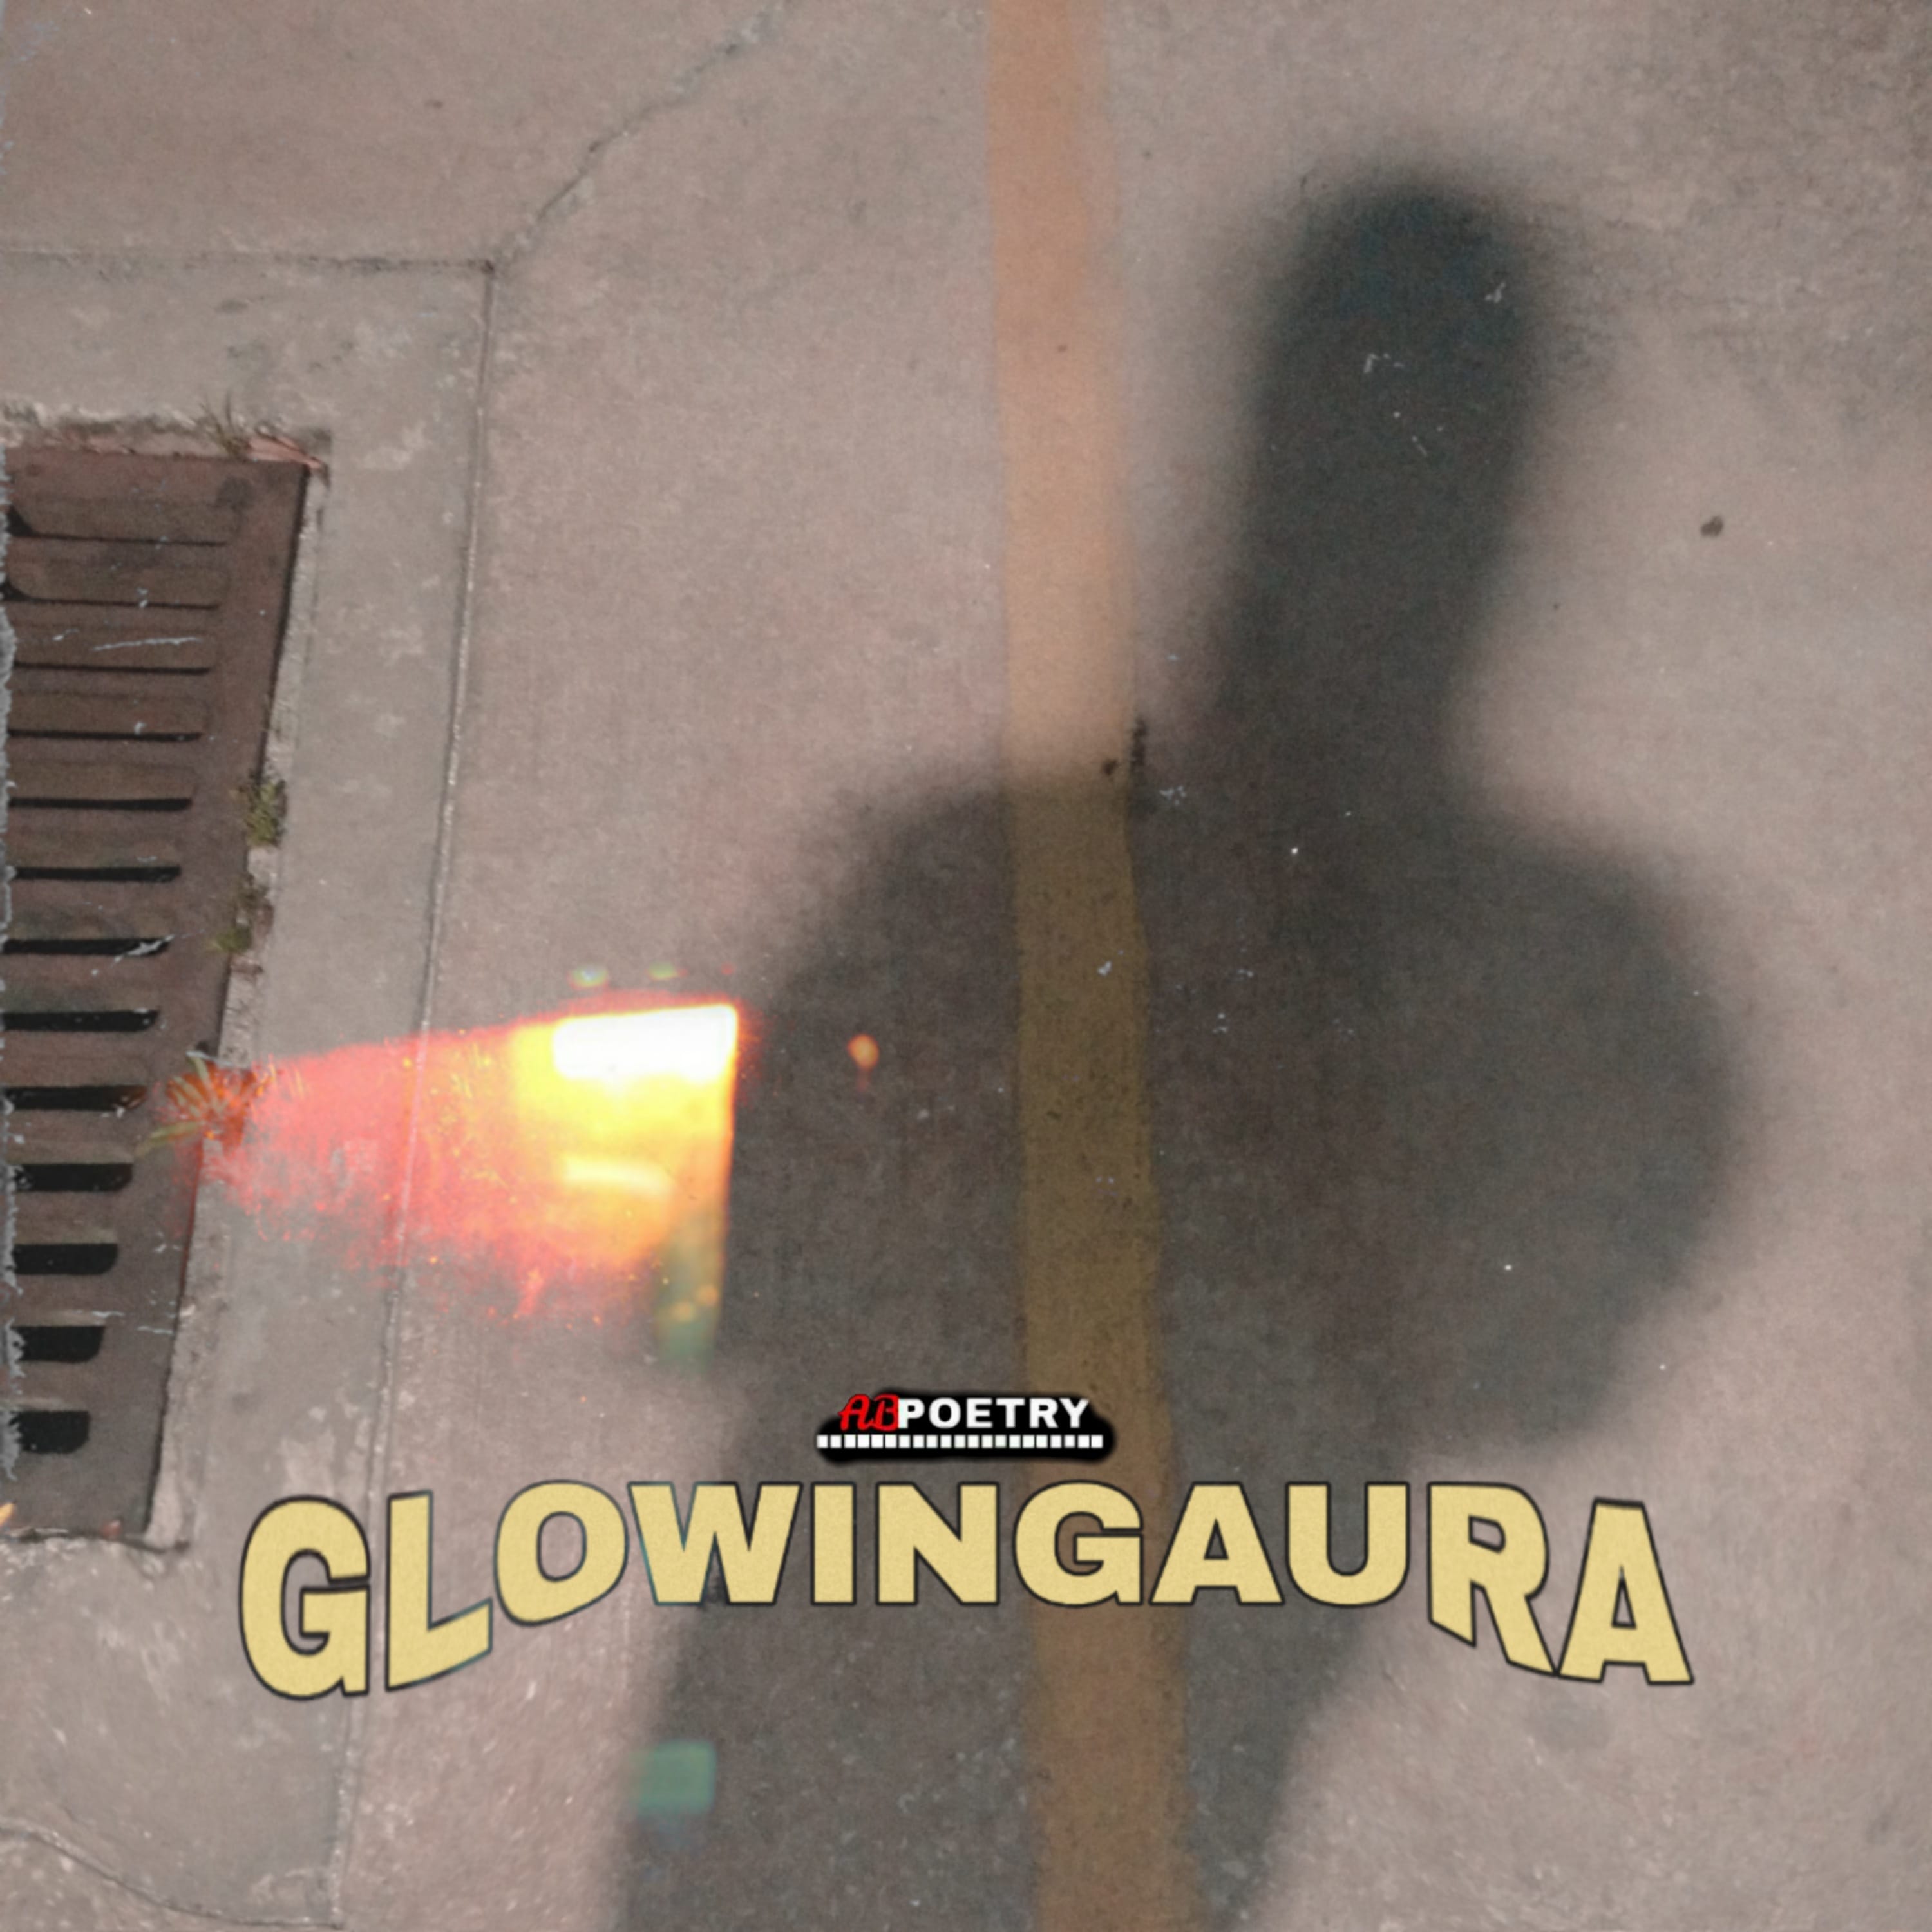 “Glowingaura” (featured on upcoming Poetry LP Titled “N-0-s-t-a-l-g”)